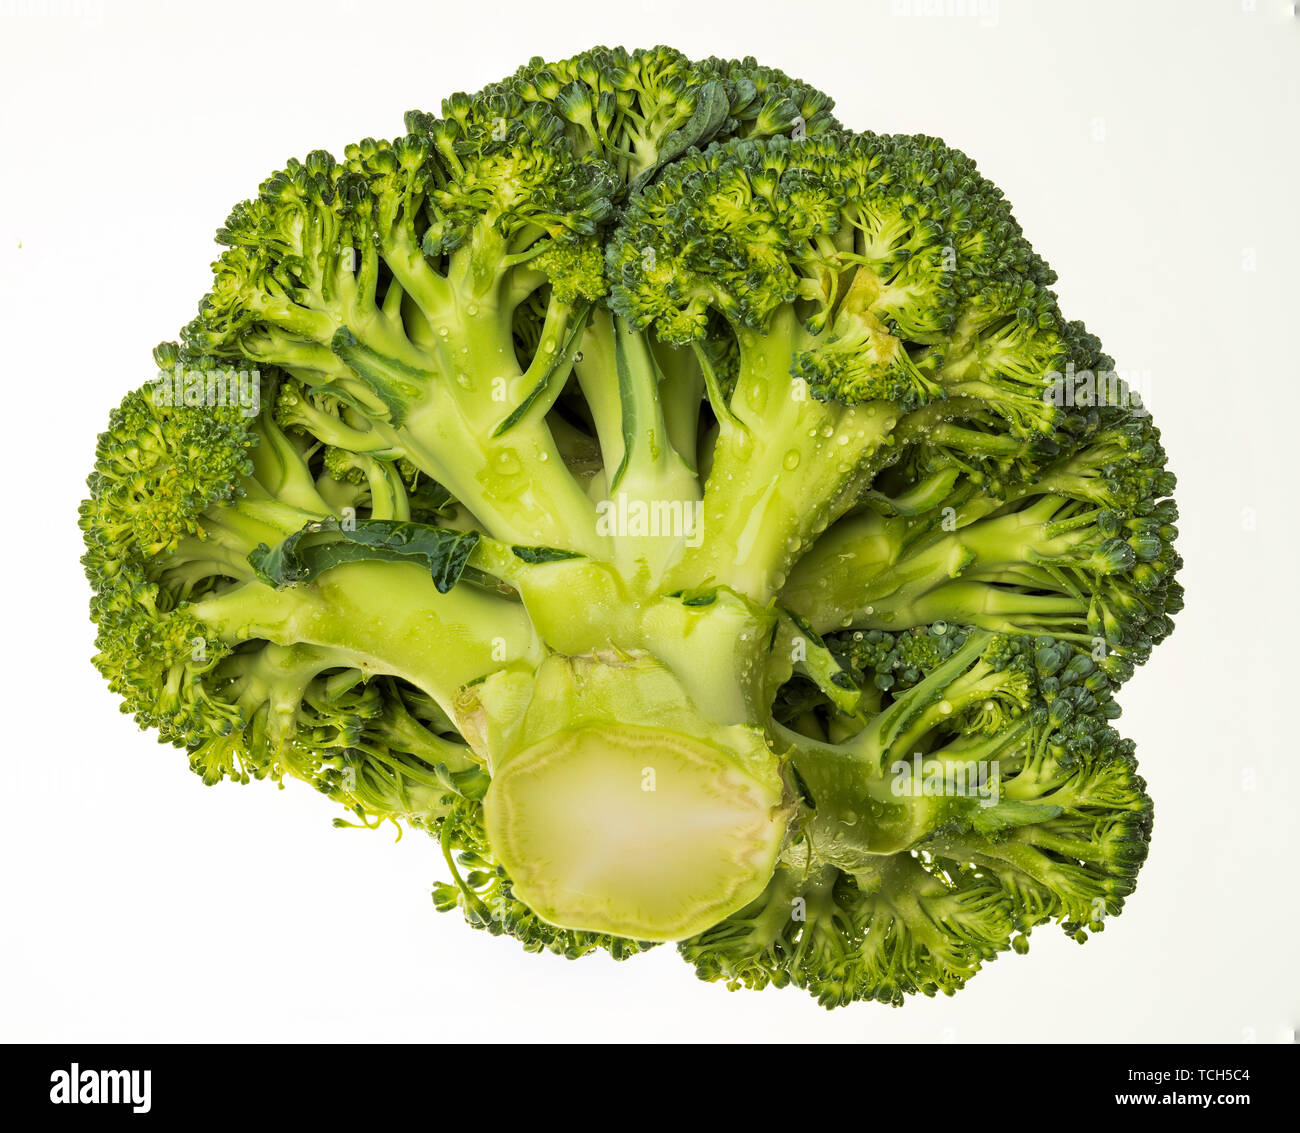 Broccoli (brocolli, brocoli, brocoli, brokoli, sprout, brassica oleracea) portion and very fresh (with water drops). Isolated on white background. Stock Photo